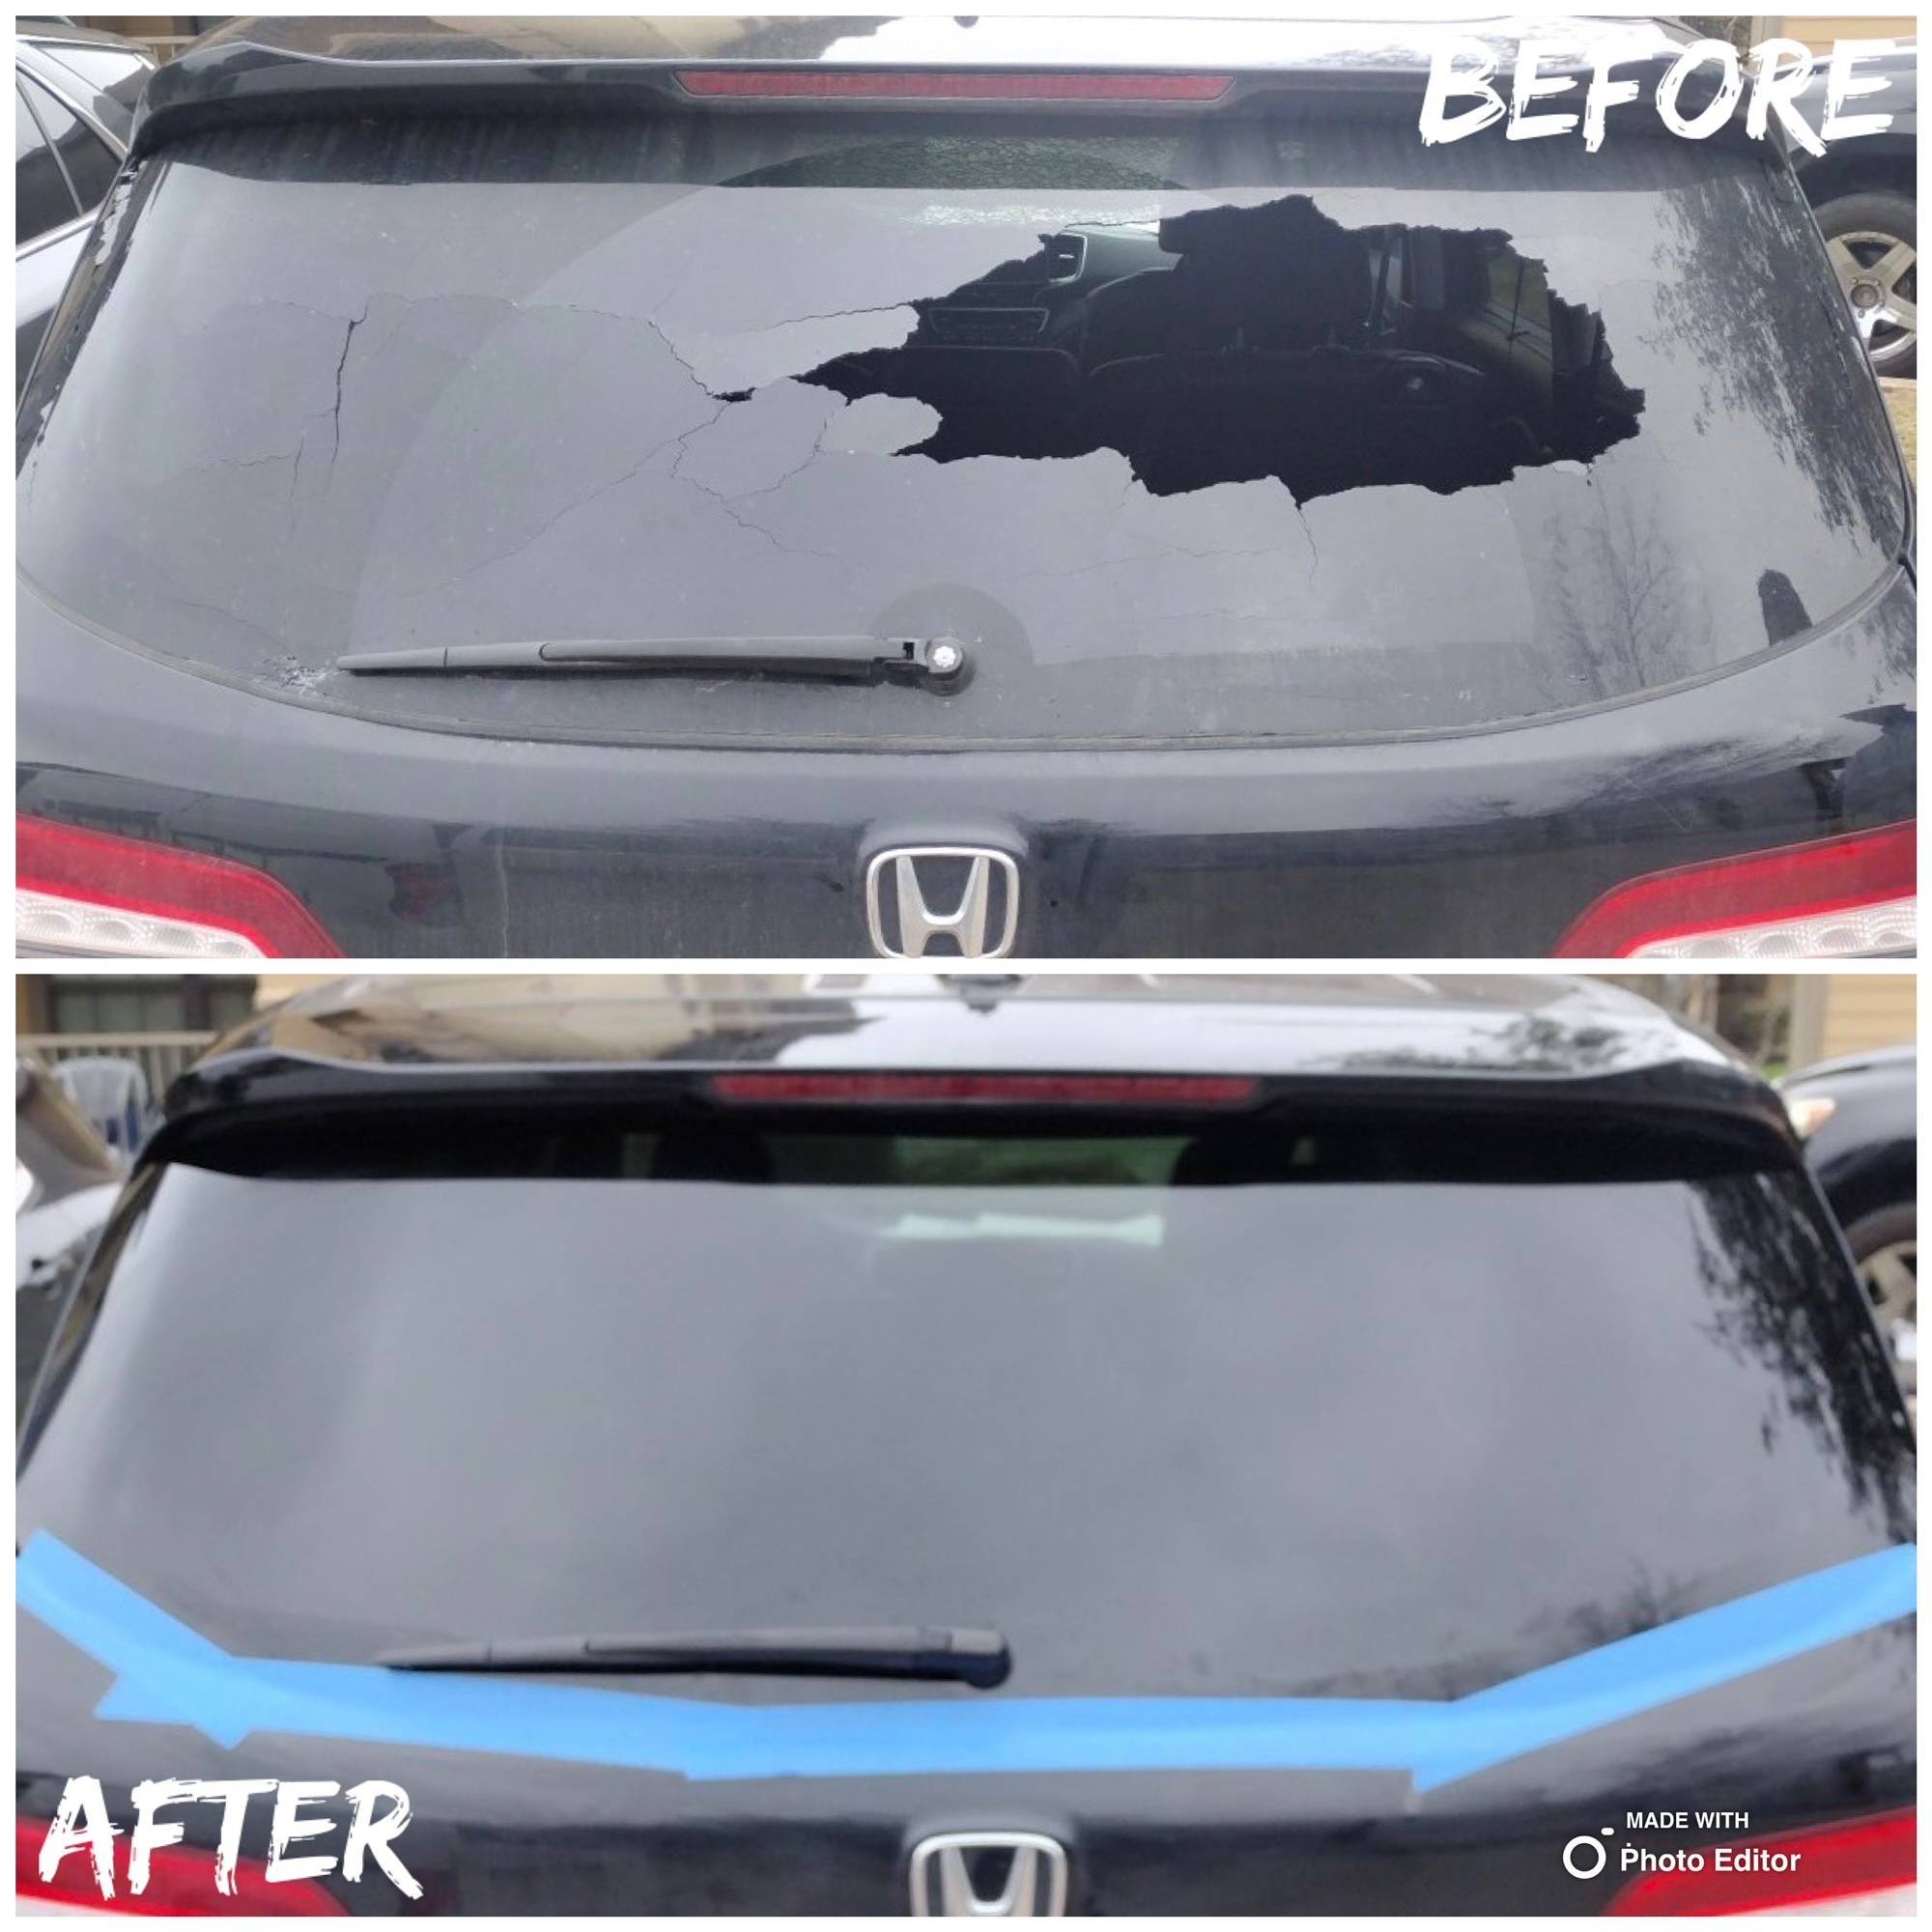 This split image showcases the repair of an SUV's rear windshield during a home auto glass appointment in Converse, Texas. The top half of the image reveals the broken-out rear windshield resulting from an accident. In contrast, the bottom half displays the expertly replaced factory privacy tinted rear windshield, restoring the vehicle to its original condition.